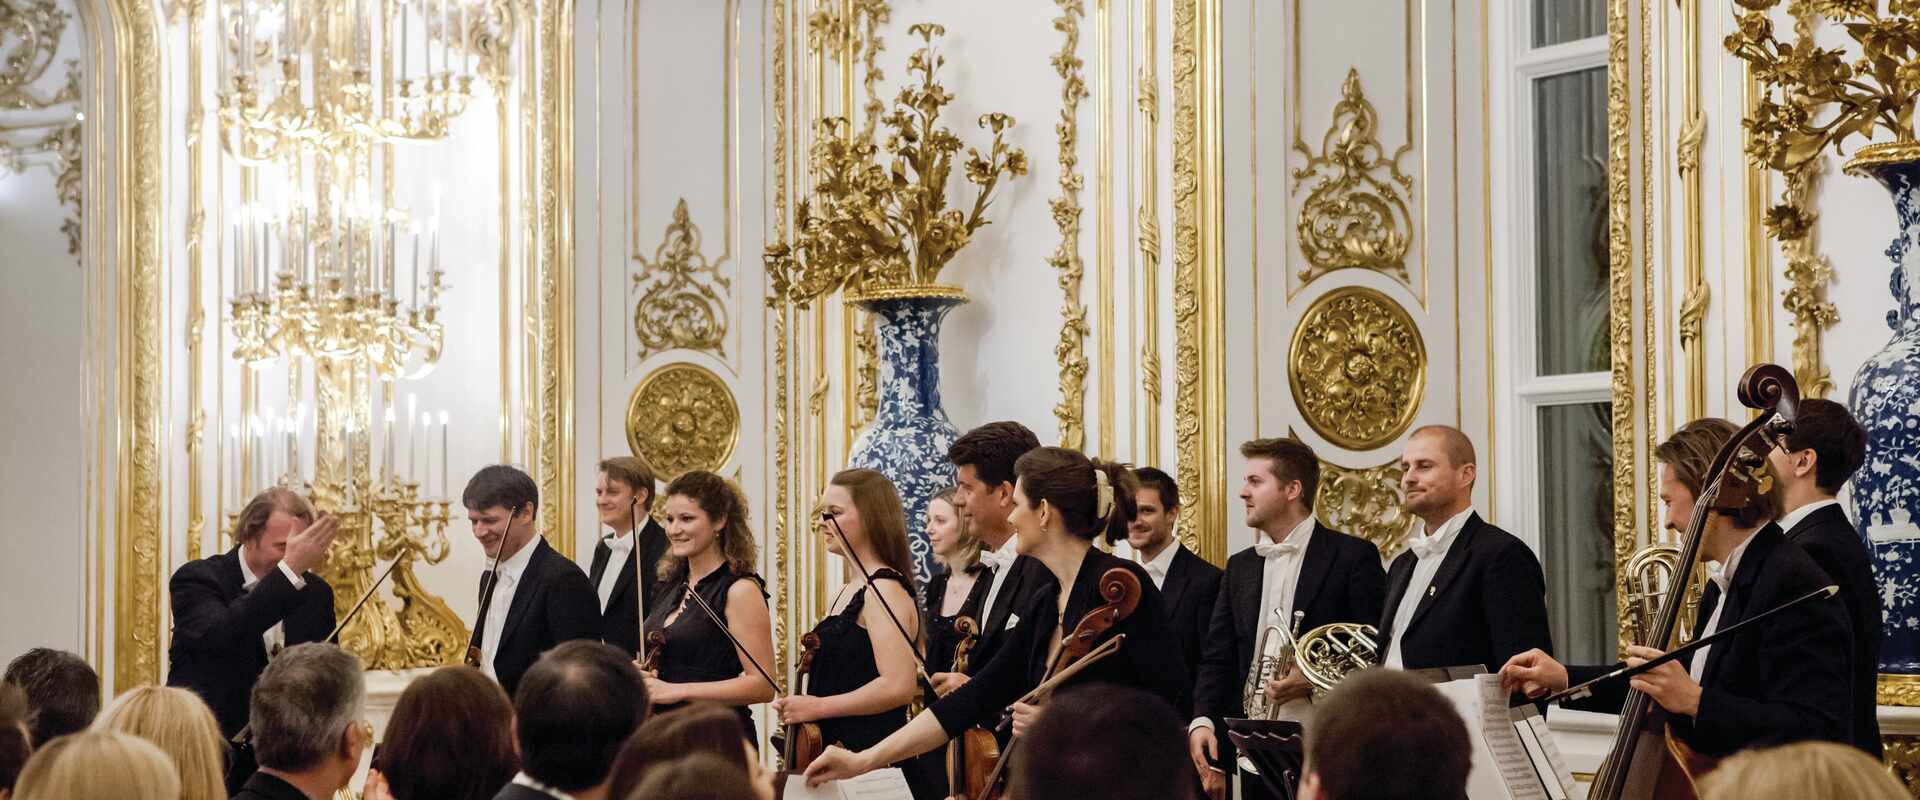 Audience watching muscians perform in the City Palace, Vienna